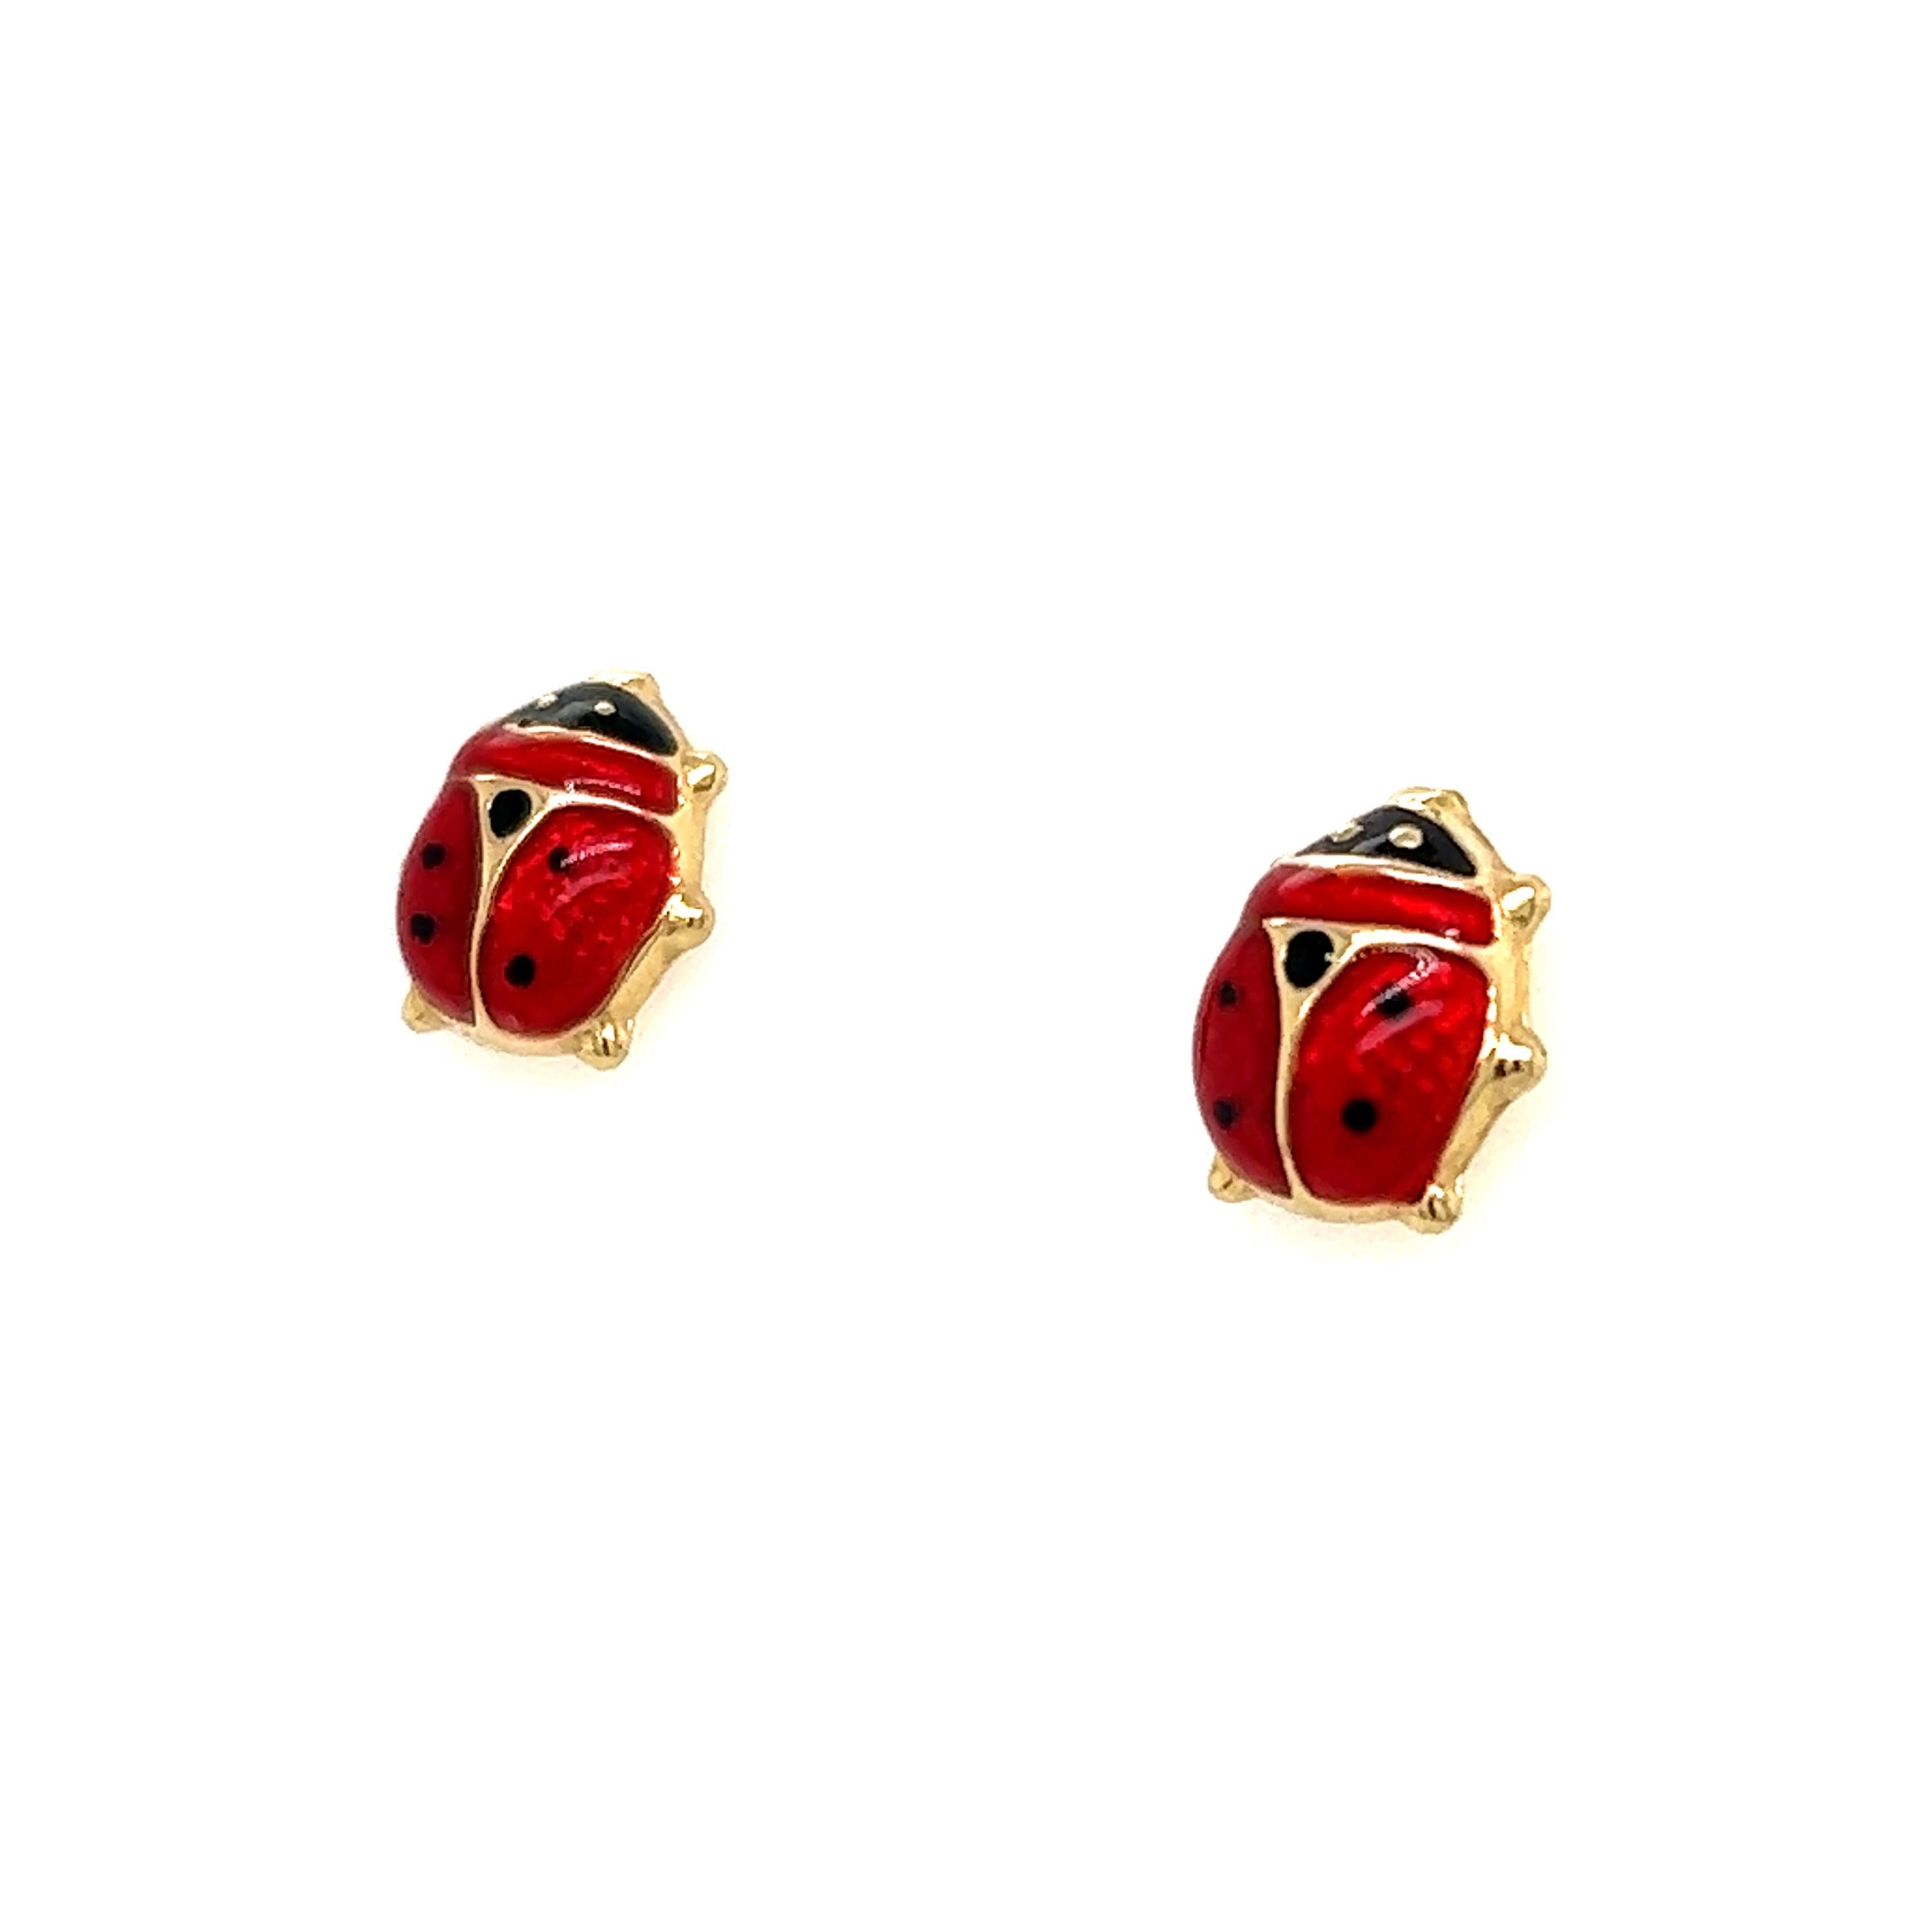 Fantastic pair of stud earrings crafted in 14k yellow gold. The pair is Italian made and details an almost life like lady bug! These earrings measure 0.40